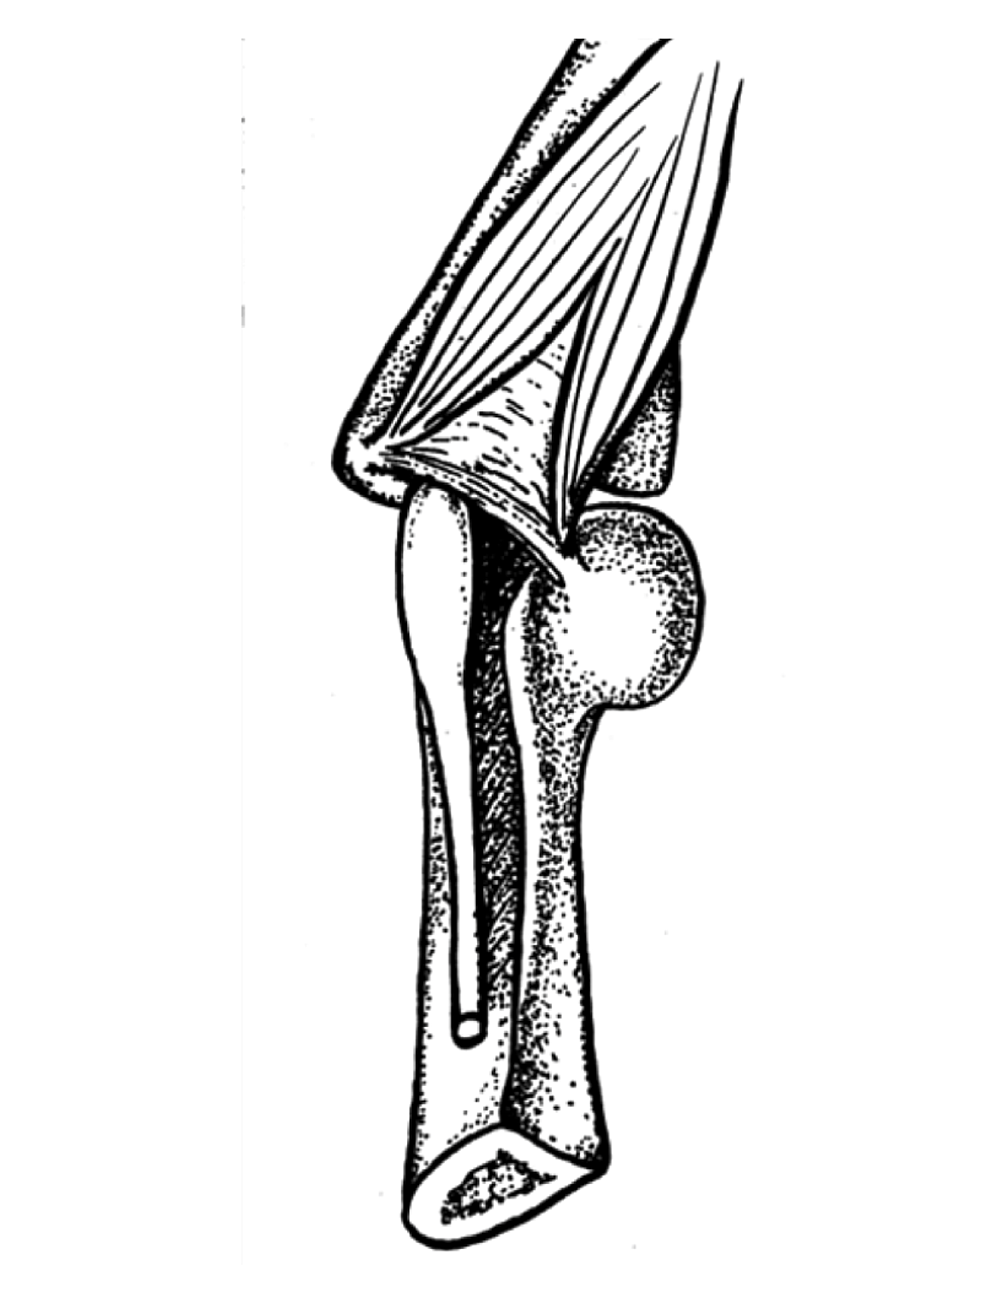 Cureus Osborne’s Ligament A Review of its History, Anatomy, and